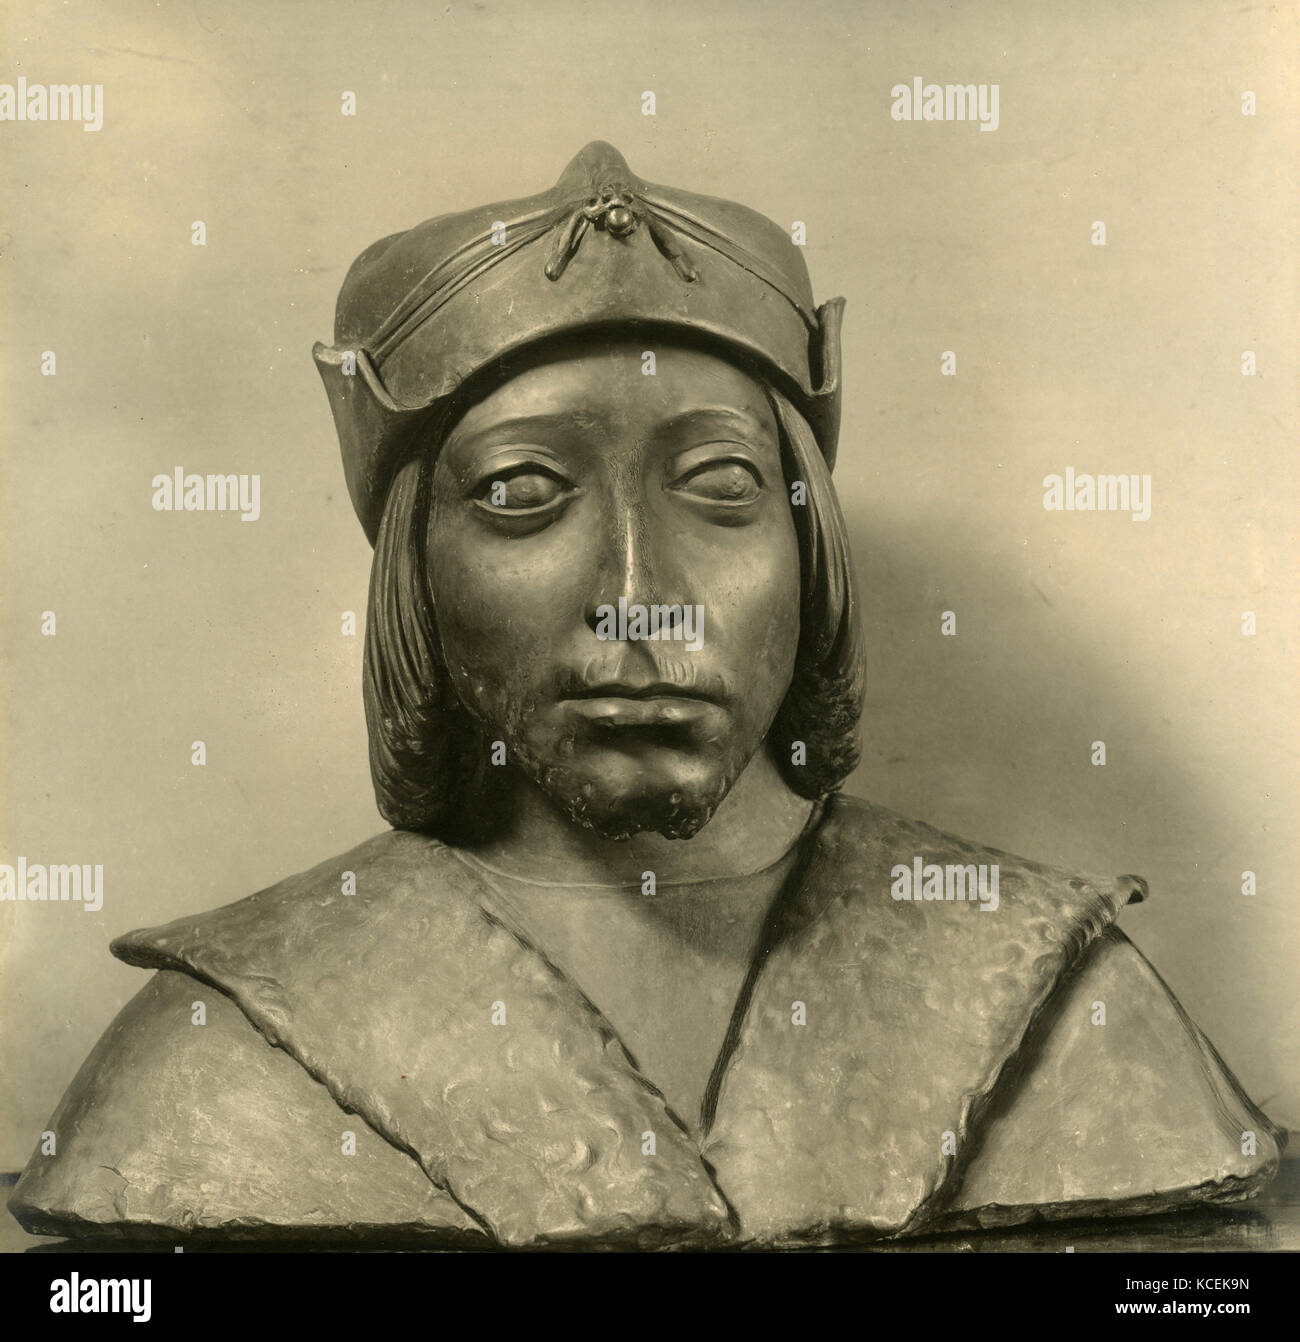 Bronze bust statue of Charles VIII King of France Stock Photo